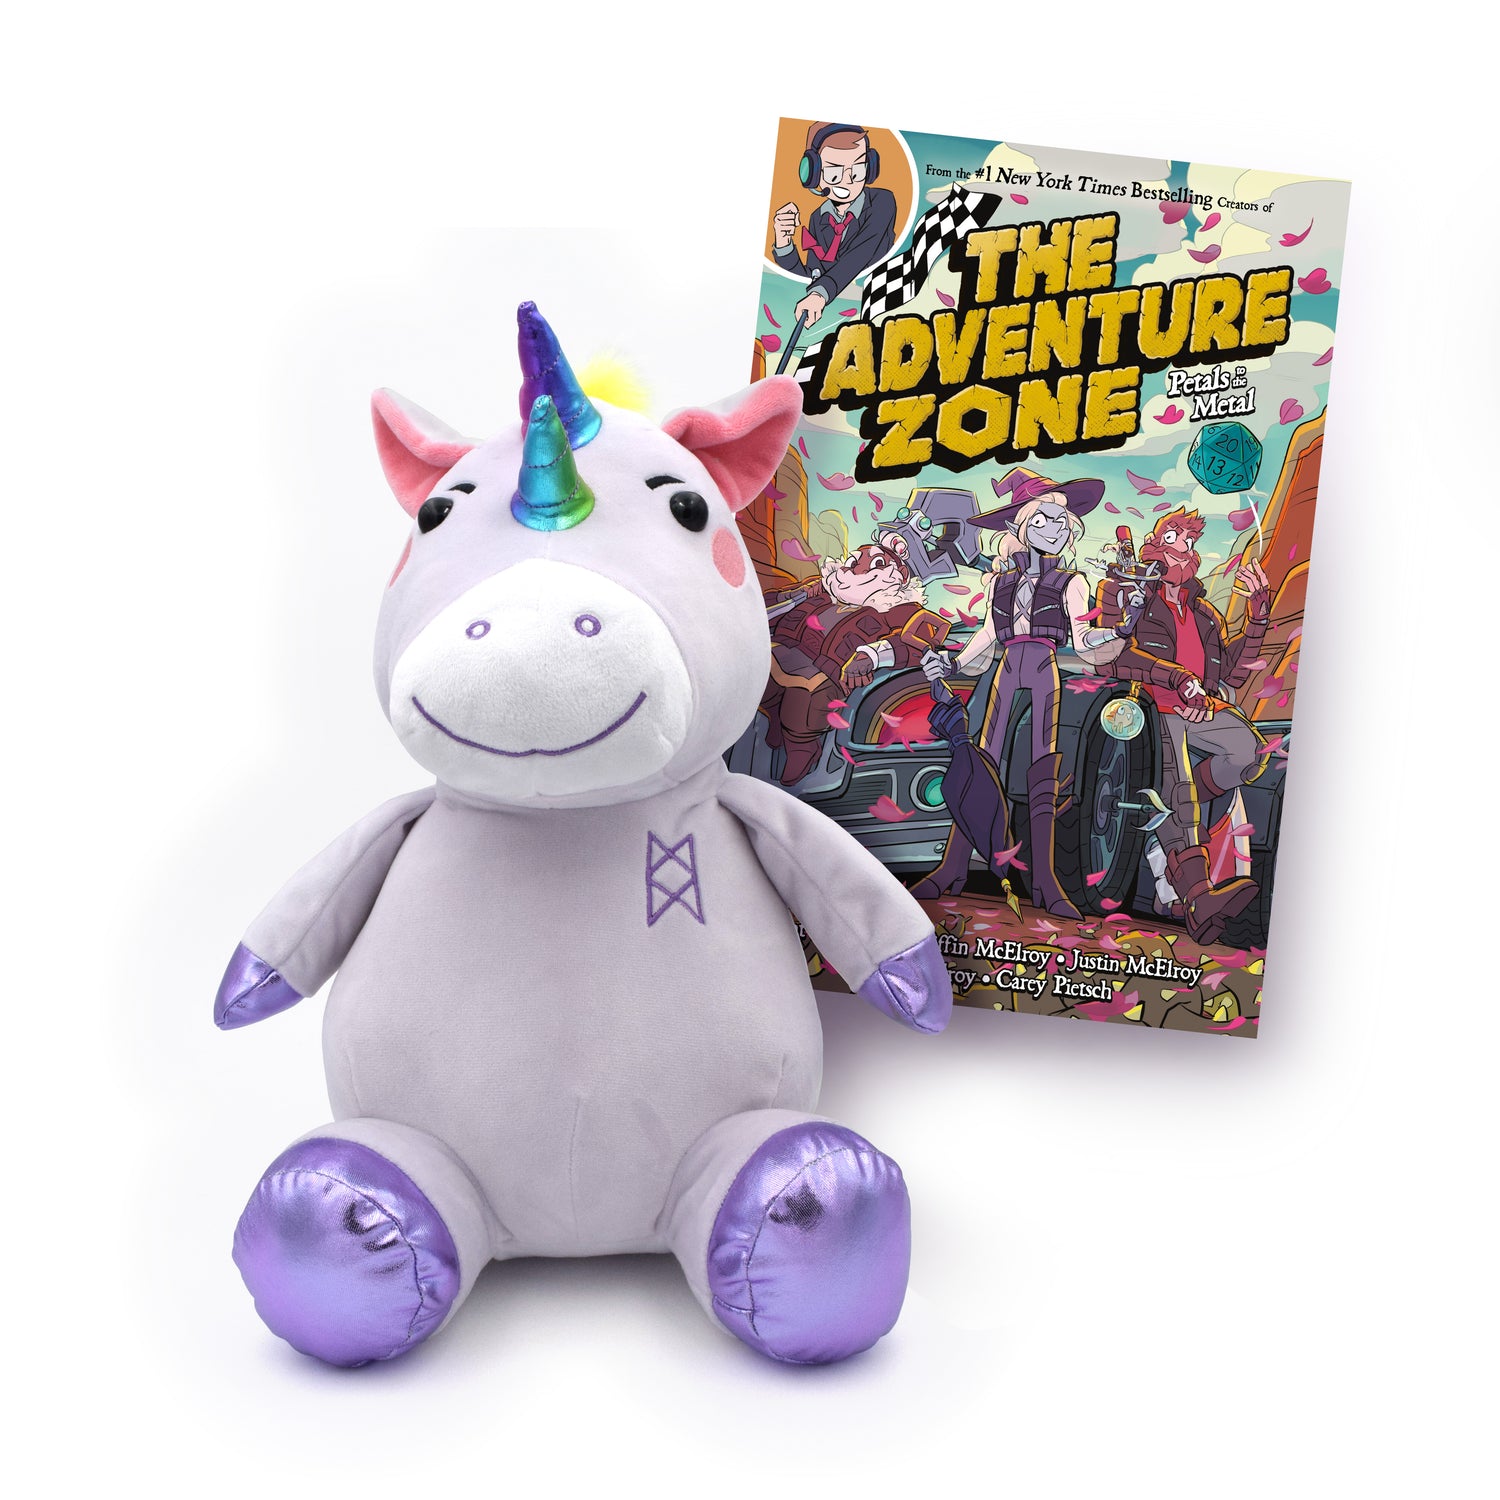 An image of the Garyl and Petals to the Metal bundle. In the foreground is a Garyl plushie. He is made of a lilac material with metallic purple hooves and metallic rainbow horns. In the background is the cover art for the Petals to the Metal graphic novel.